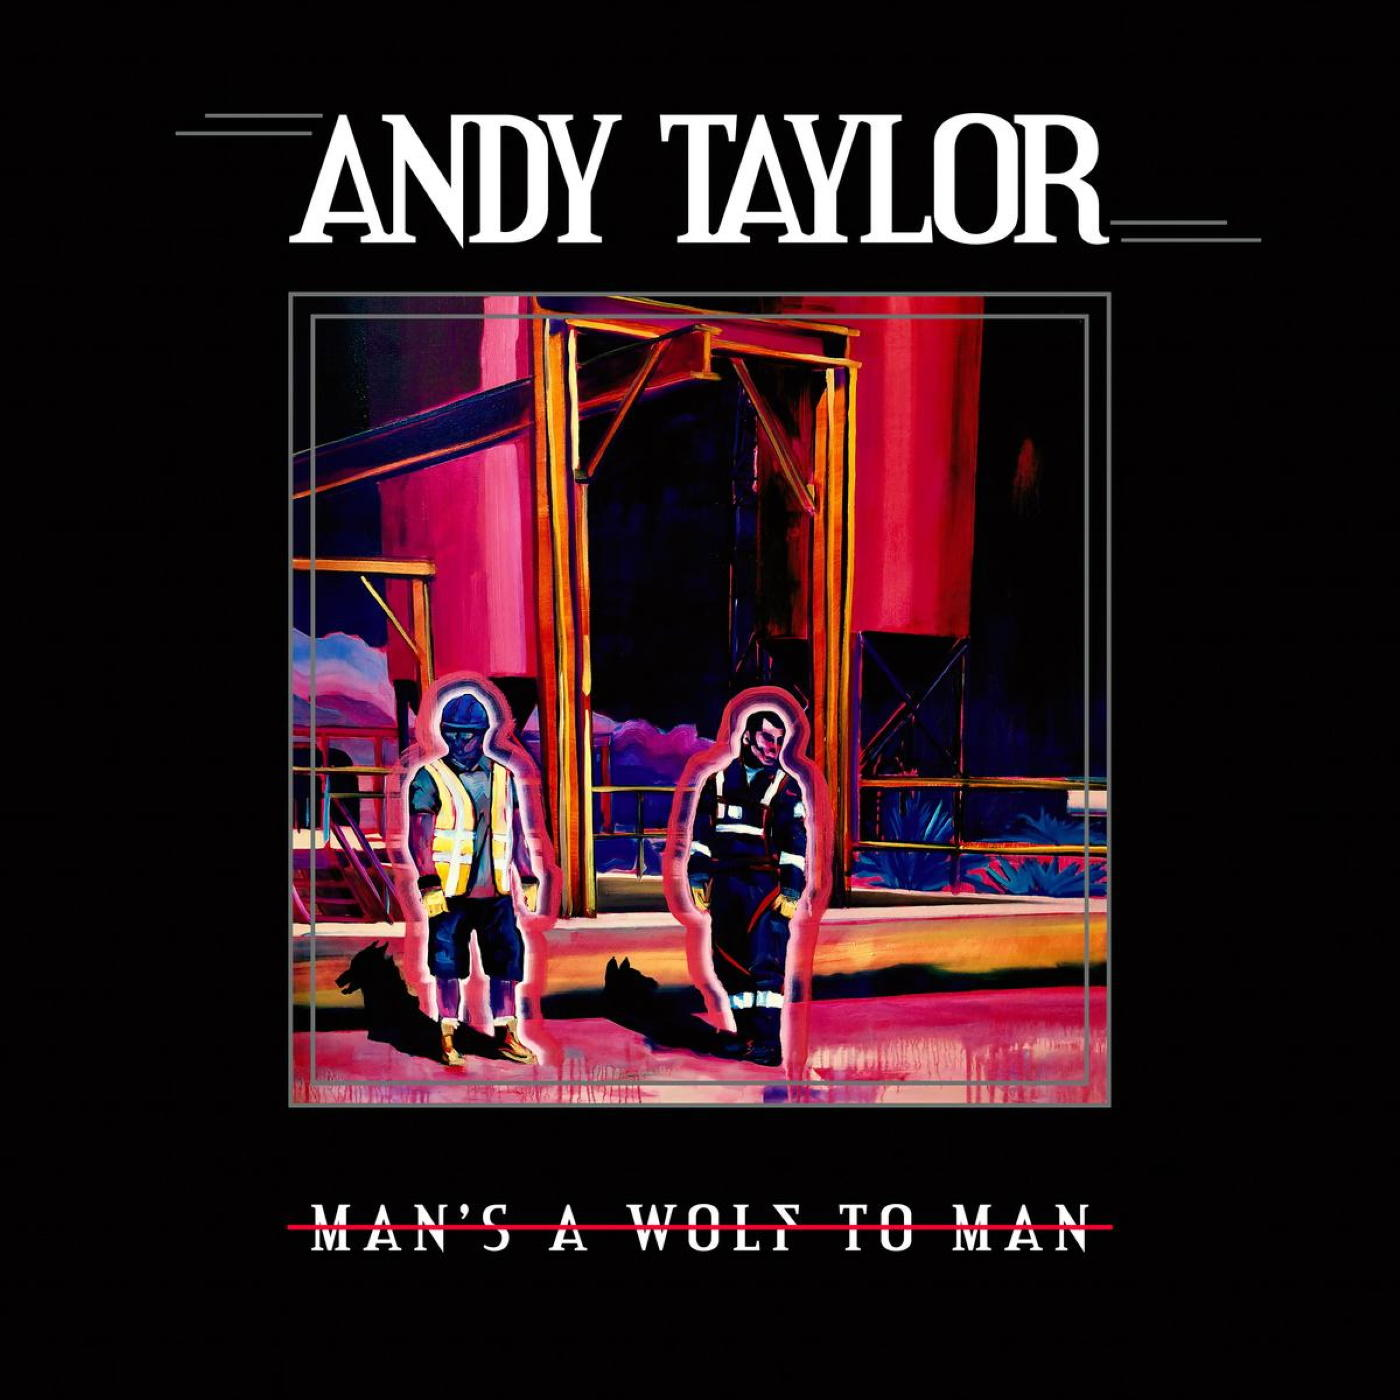 Man\'s A - - To Taylor Wolf Man (Vinyl) Andy